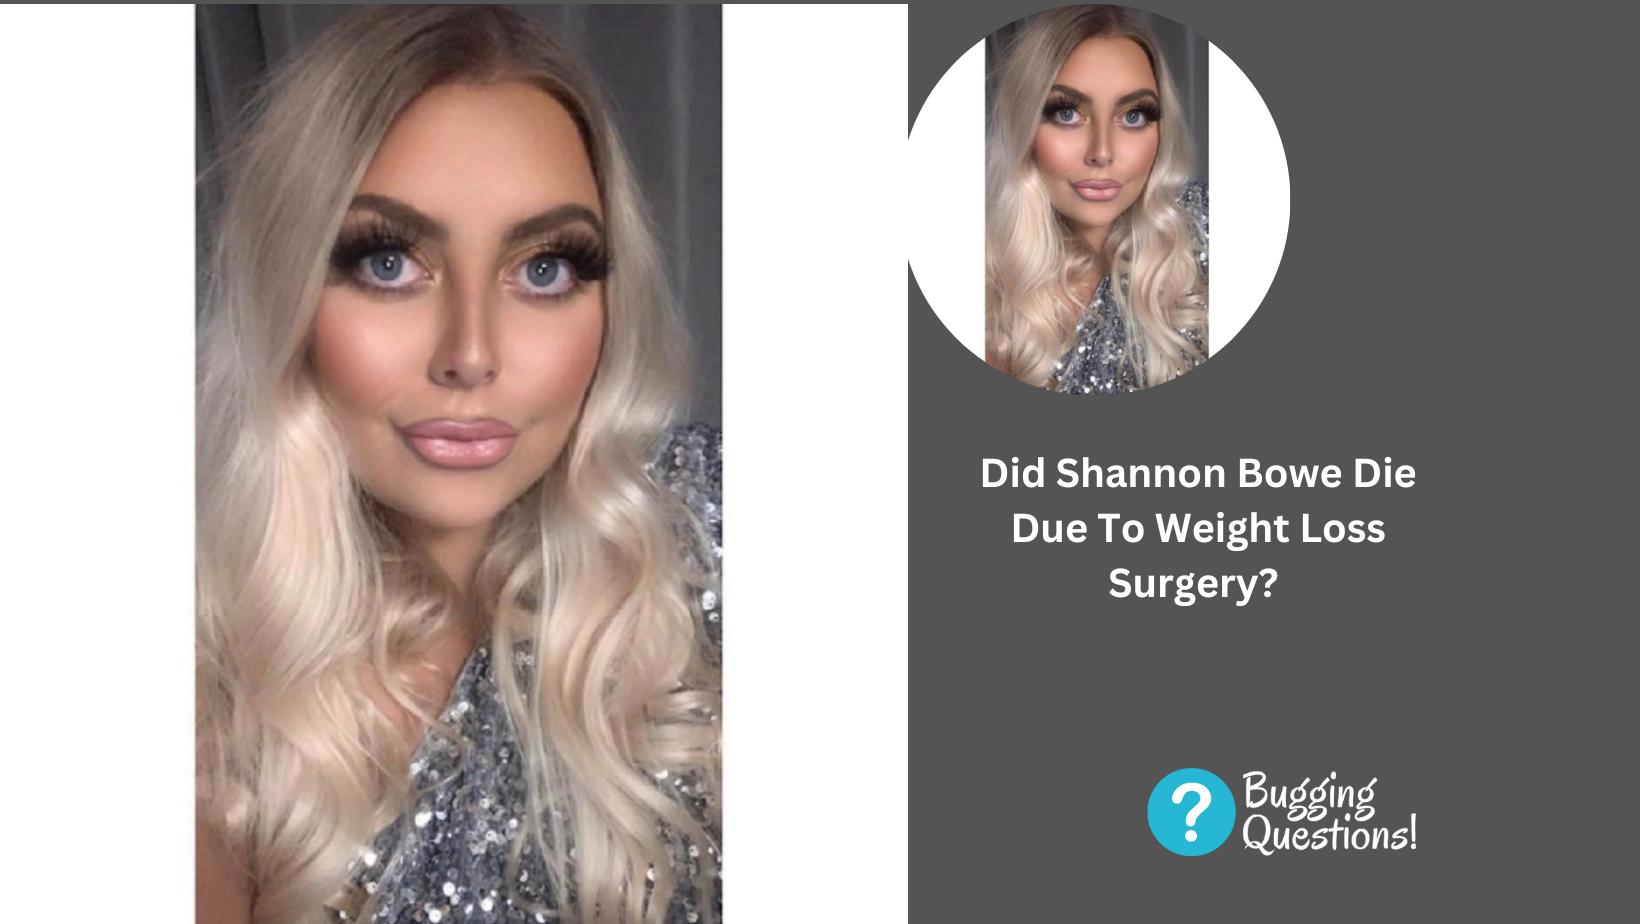 Did Shannon Bowe Die Due To Weight Loss Surgery?